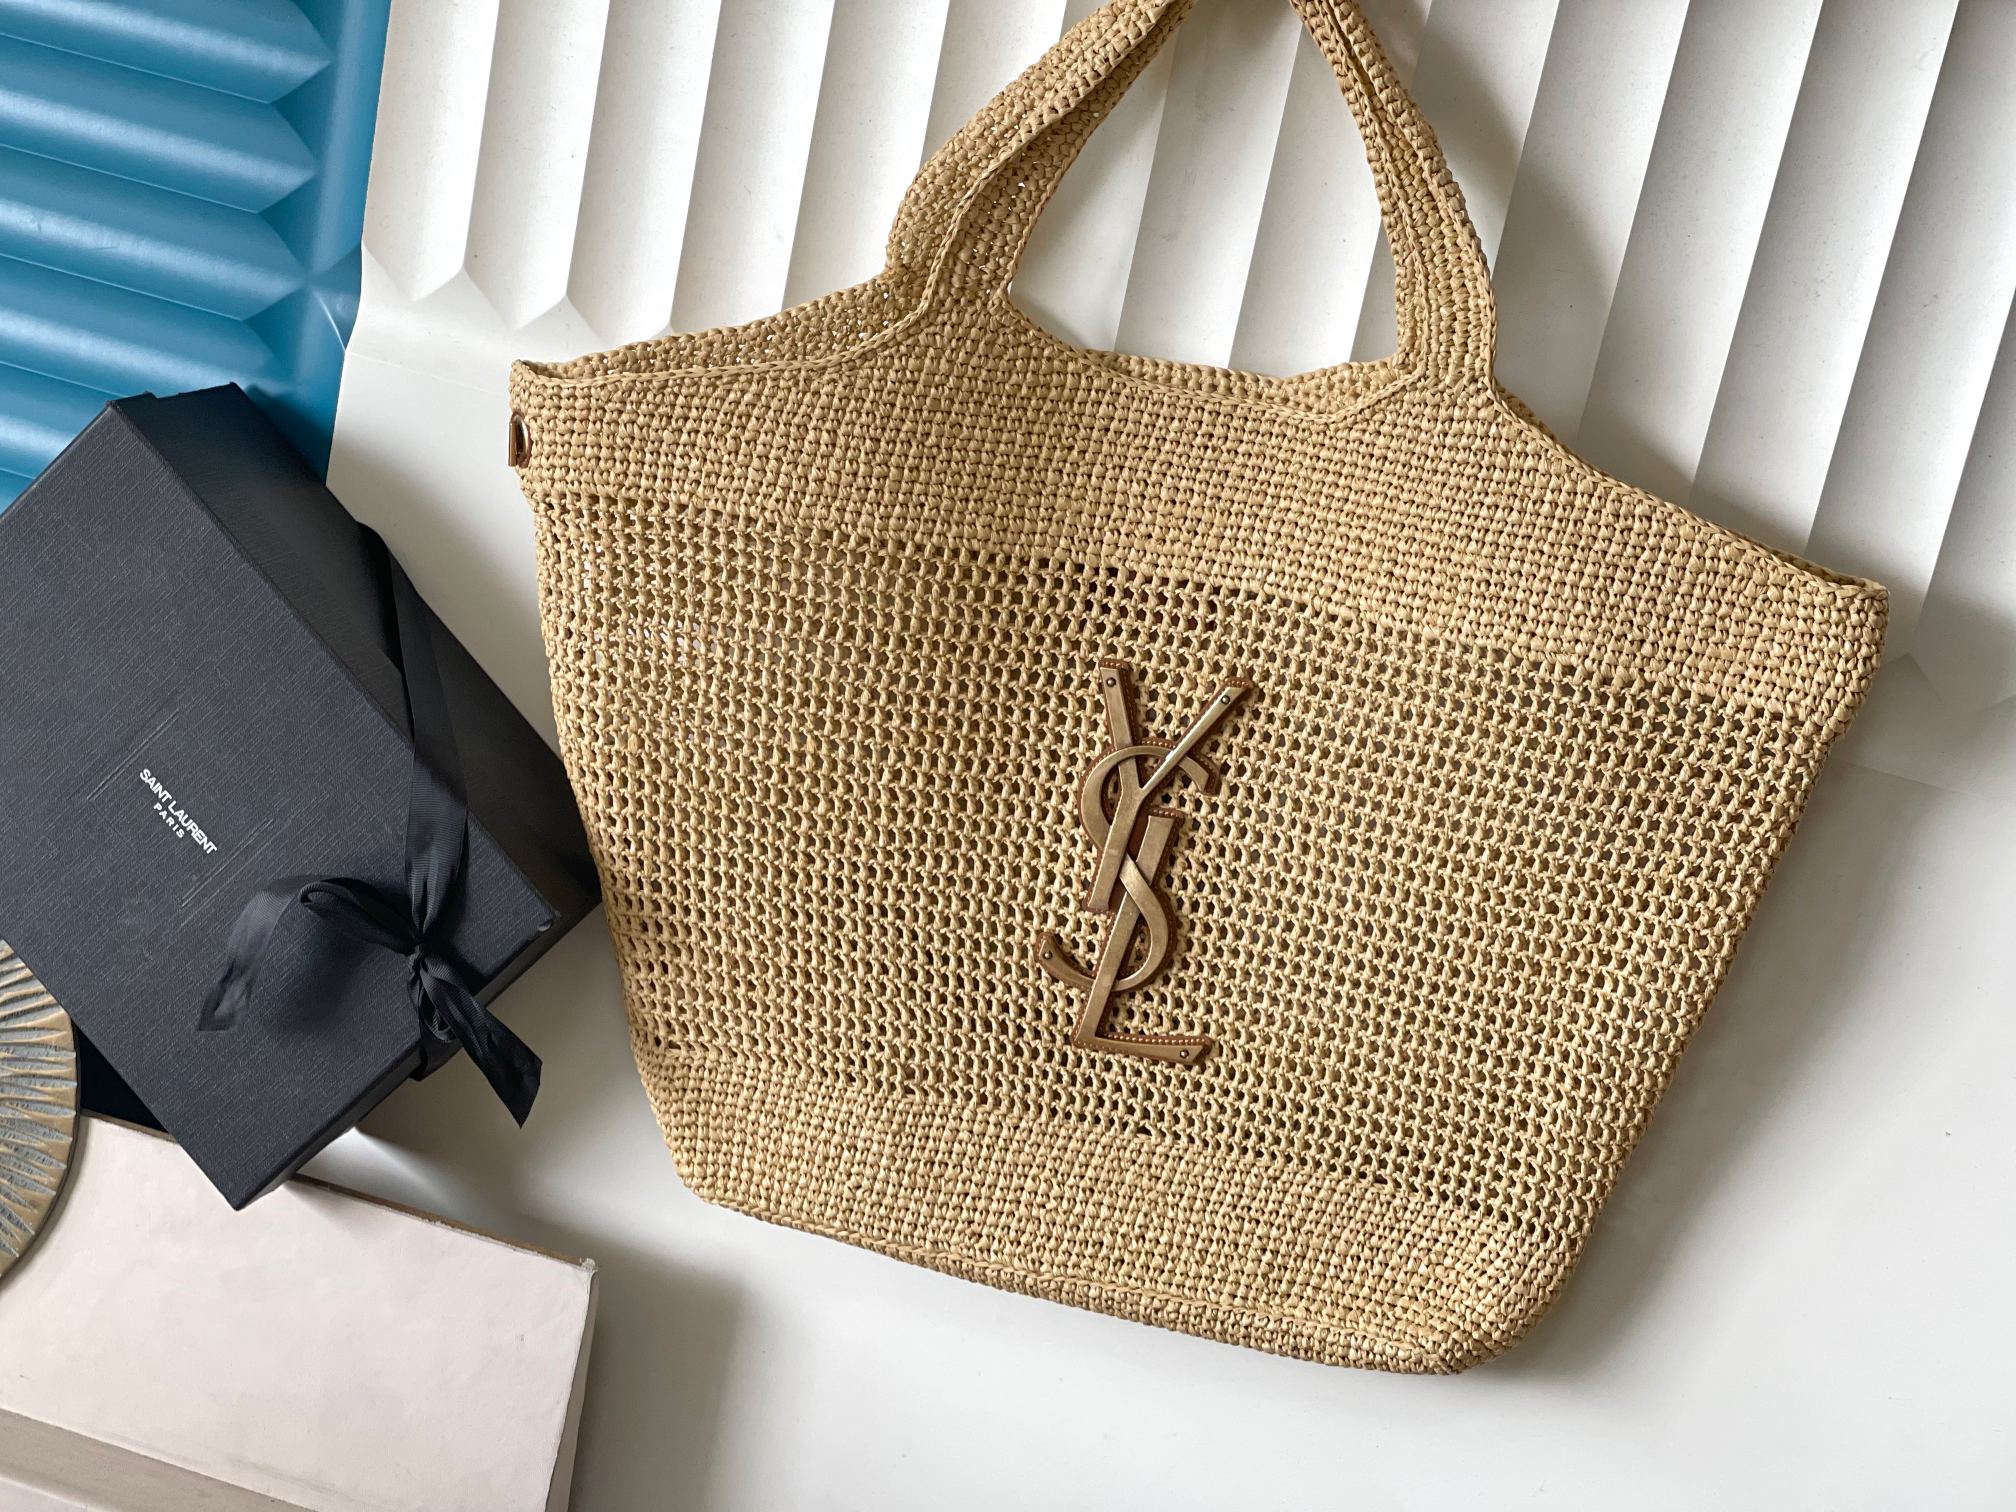 Yves Saint Laurent Bags Handbags from China 2023
 Raffia Straw Woven Spring/Summer Collection